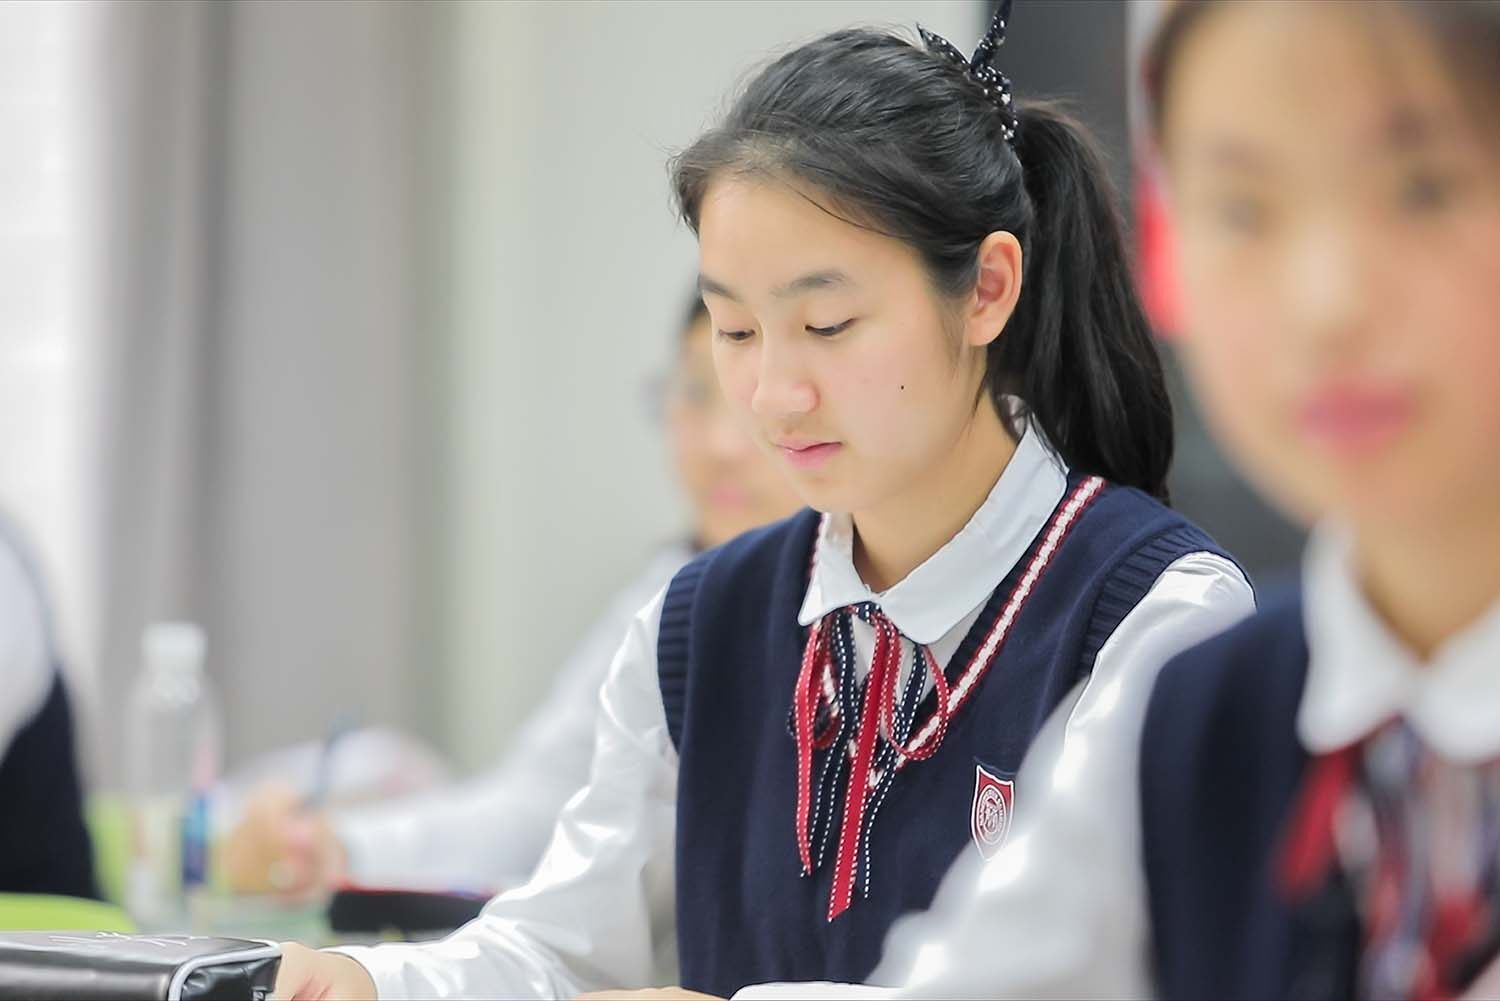 A Chinese student concentrates on her work in a school in China